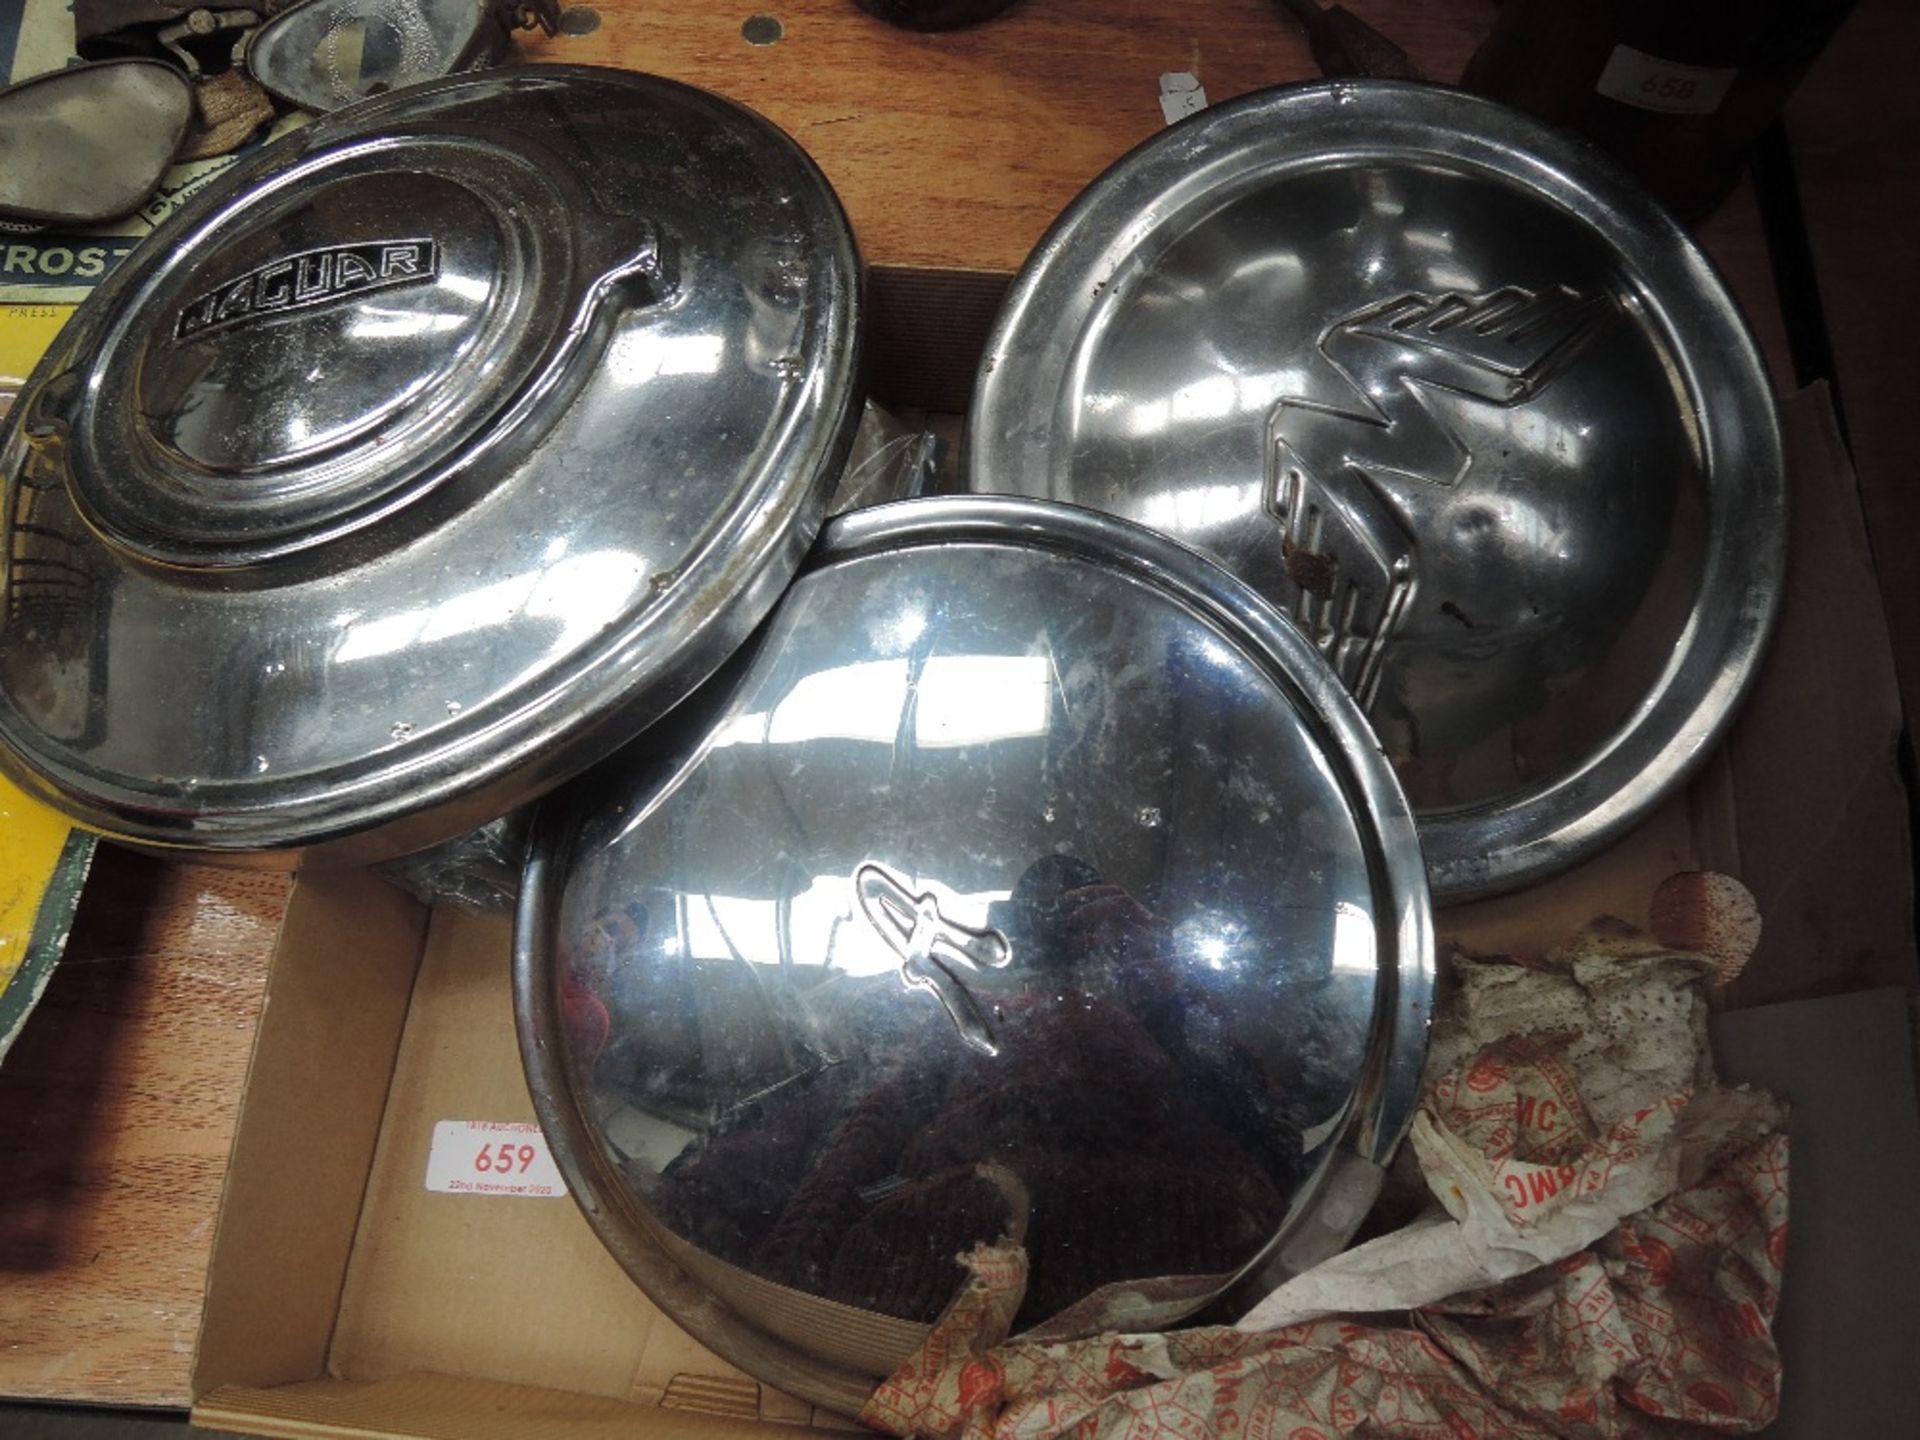 Three car hub caps, for Jaguar, Austin and Wolsey and an assortment or vintage key rings.